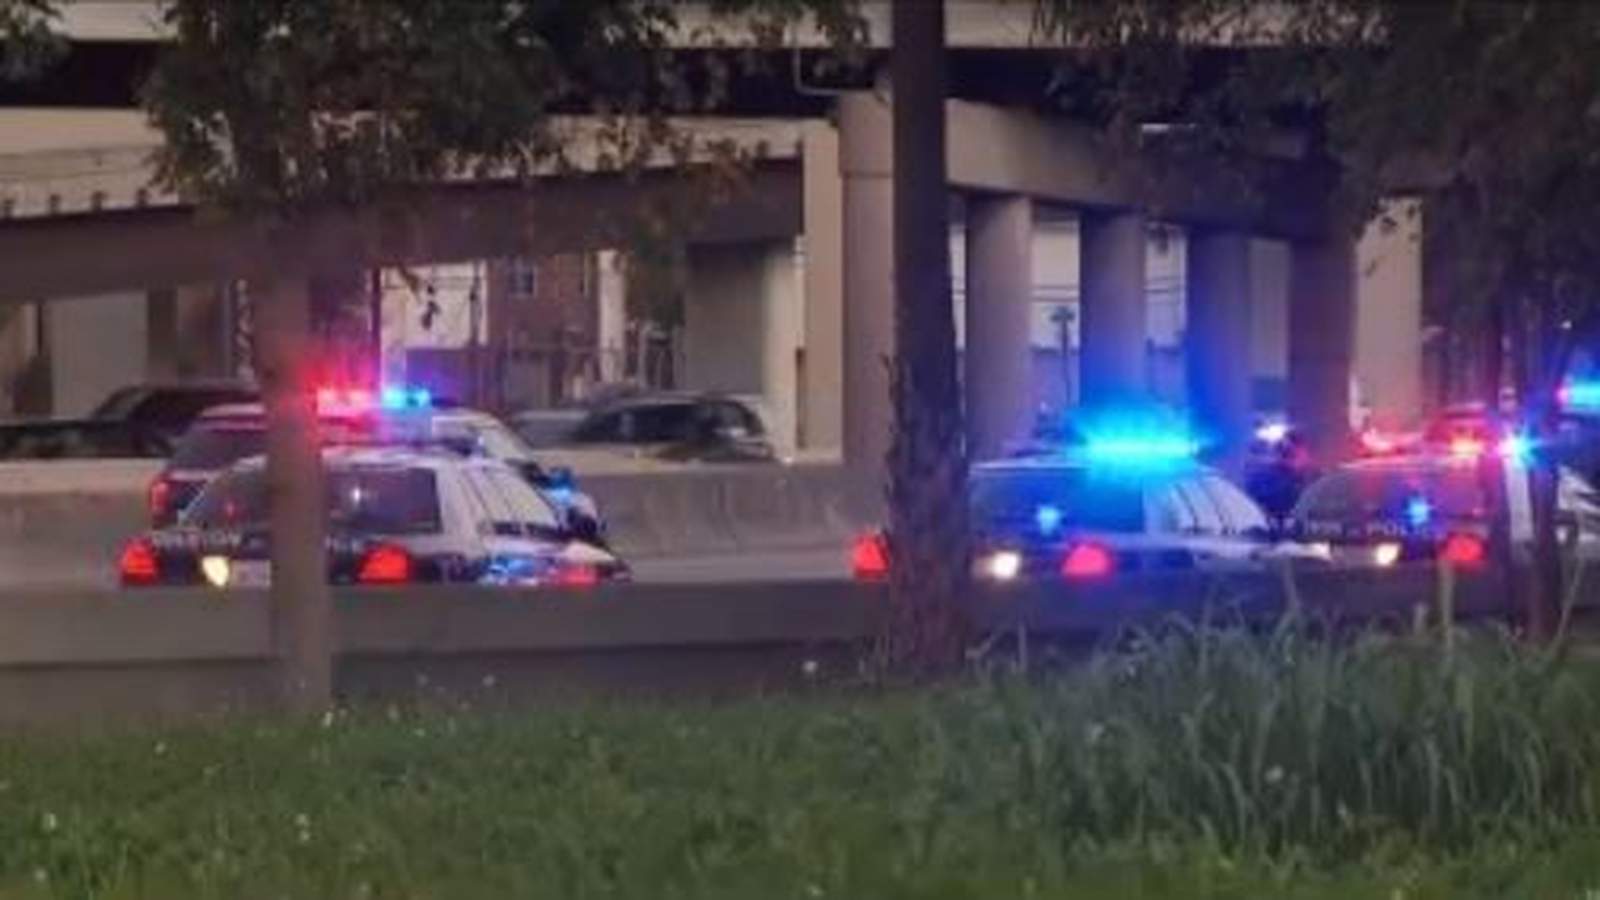 Man fatally struck by car after being chased into the street in downtown Houston, police say